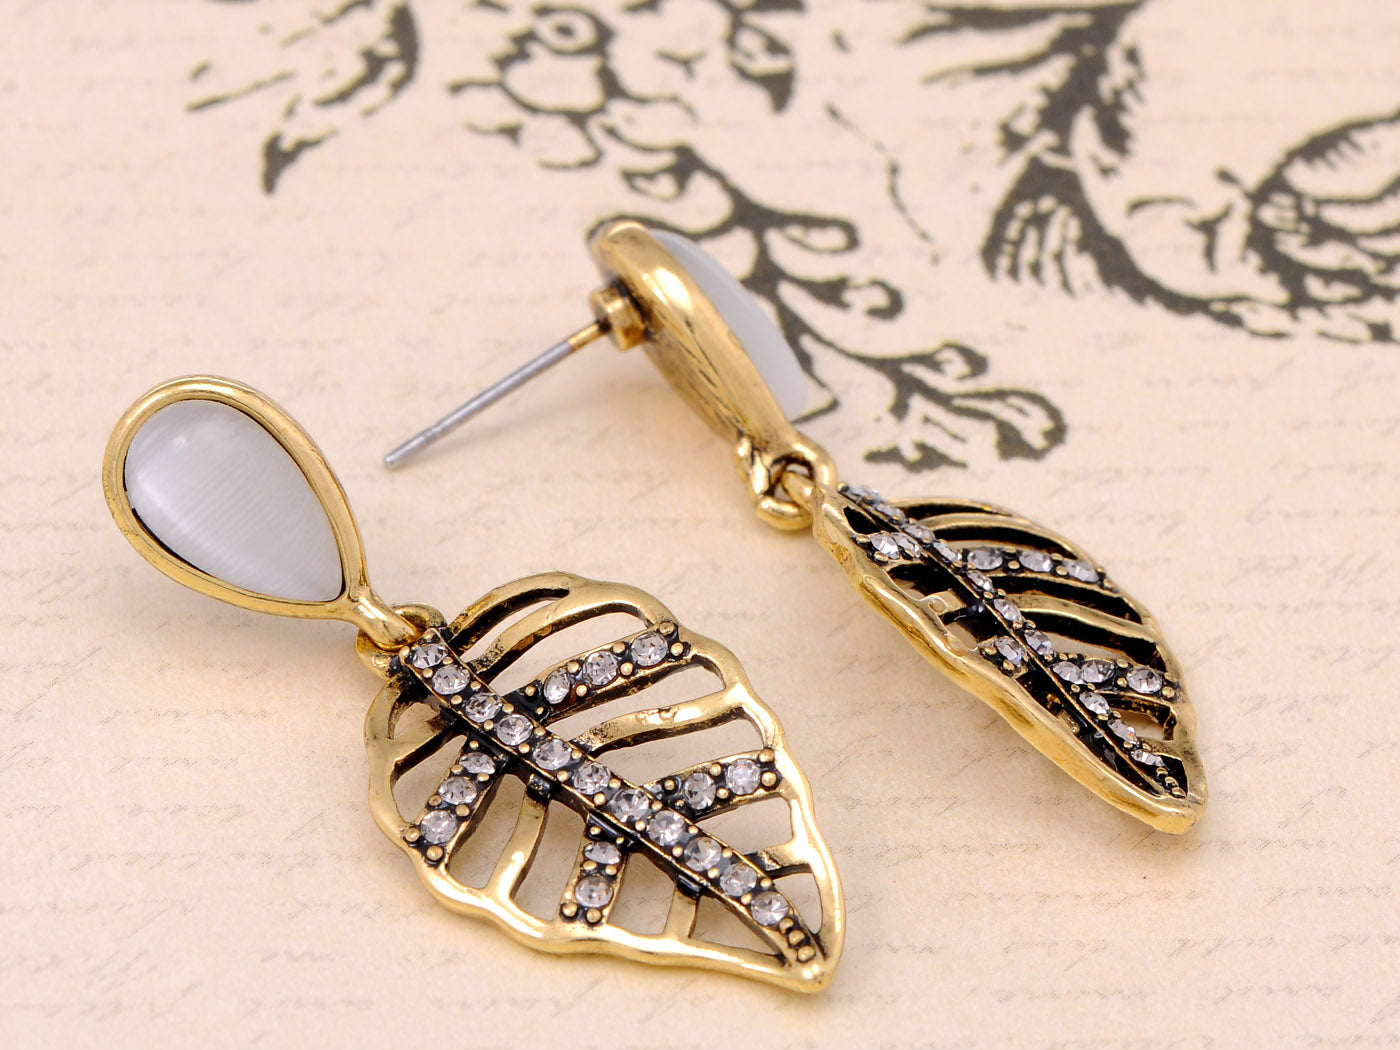 Plated Hollow Leaf Shaped Stud Earrings Jewelry Gifts For Women Girls